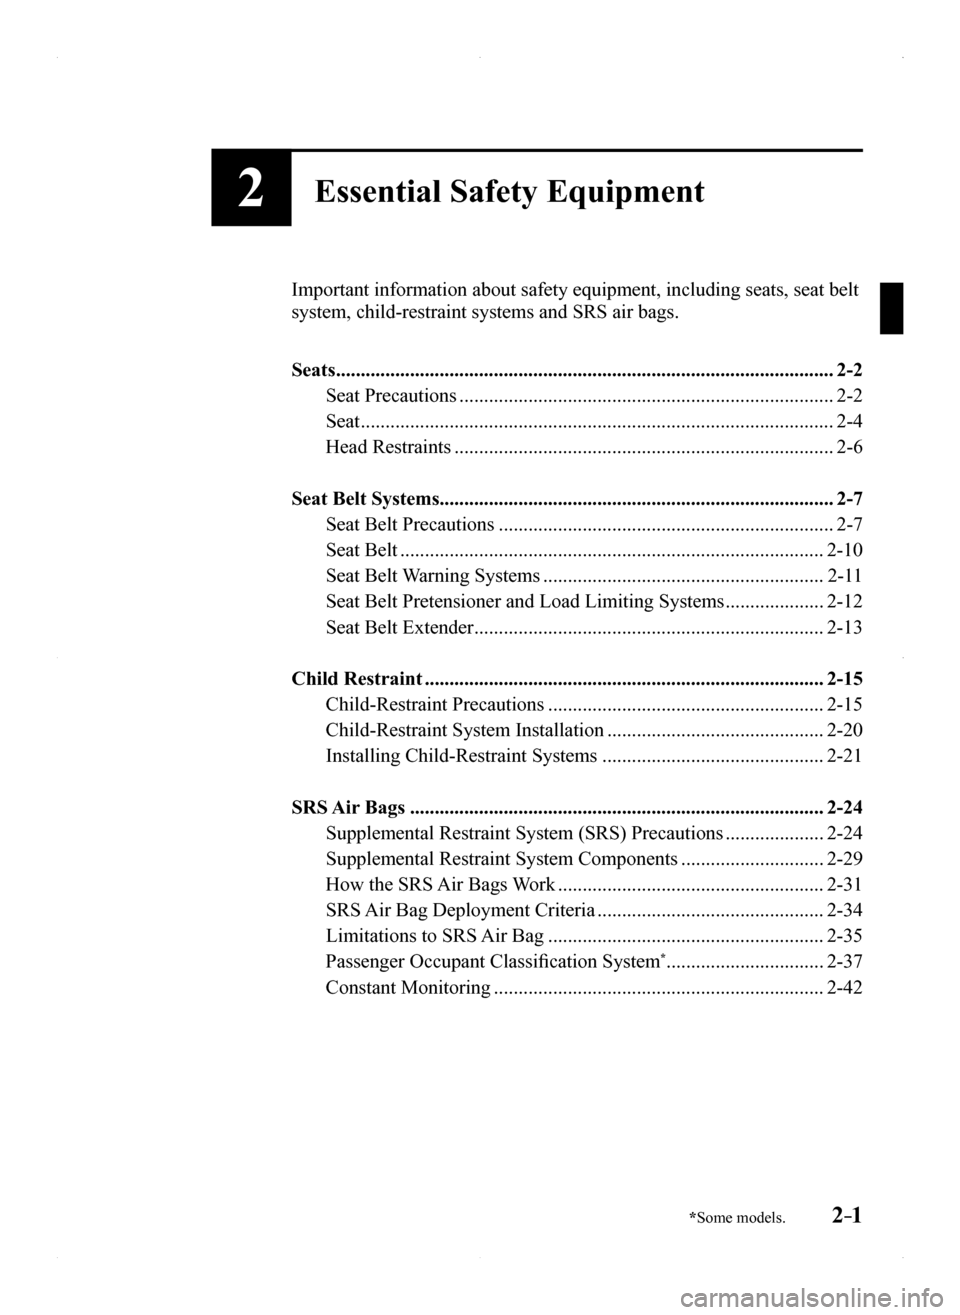 MAZDA MODEL MX-5 2016  Owners Manual (in English) 2–1*Some models.
2Essential Safety Equipment
Important information about safety equipment, including seats, seat belt\
 
system, child-restraint systems and SRS air bags.
Seats .....................